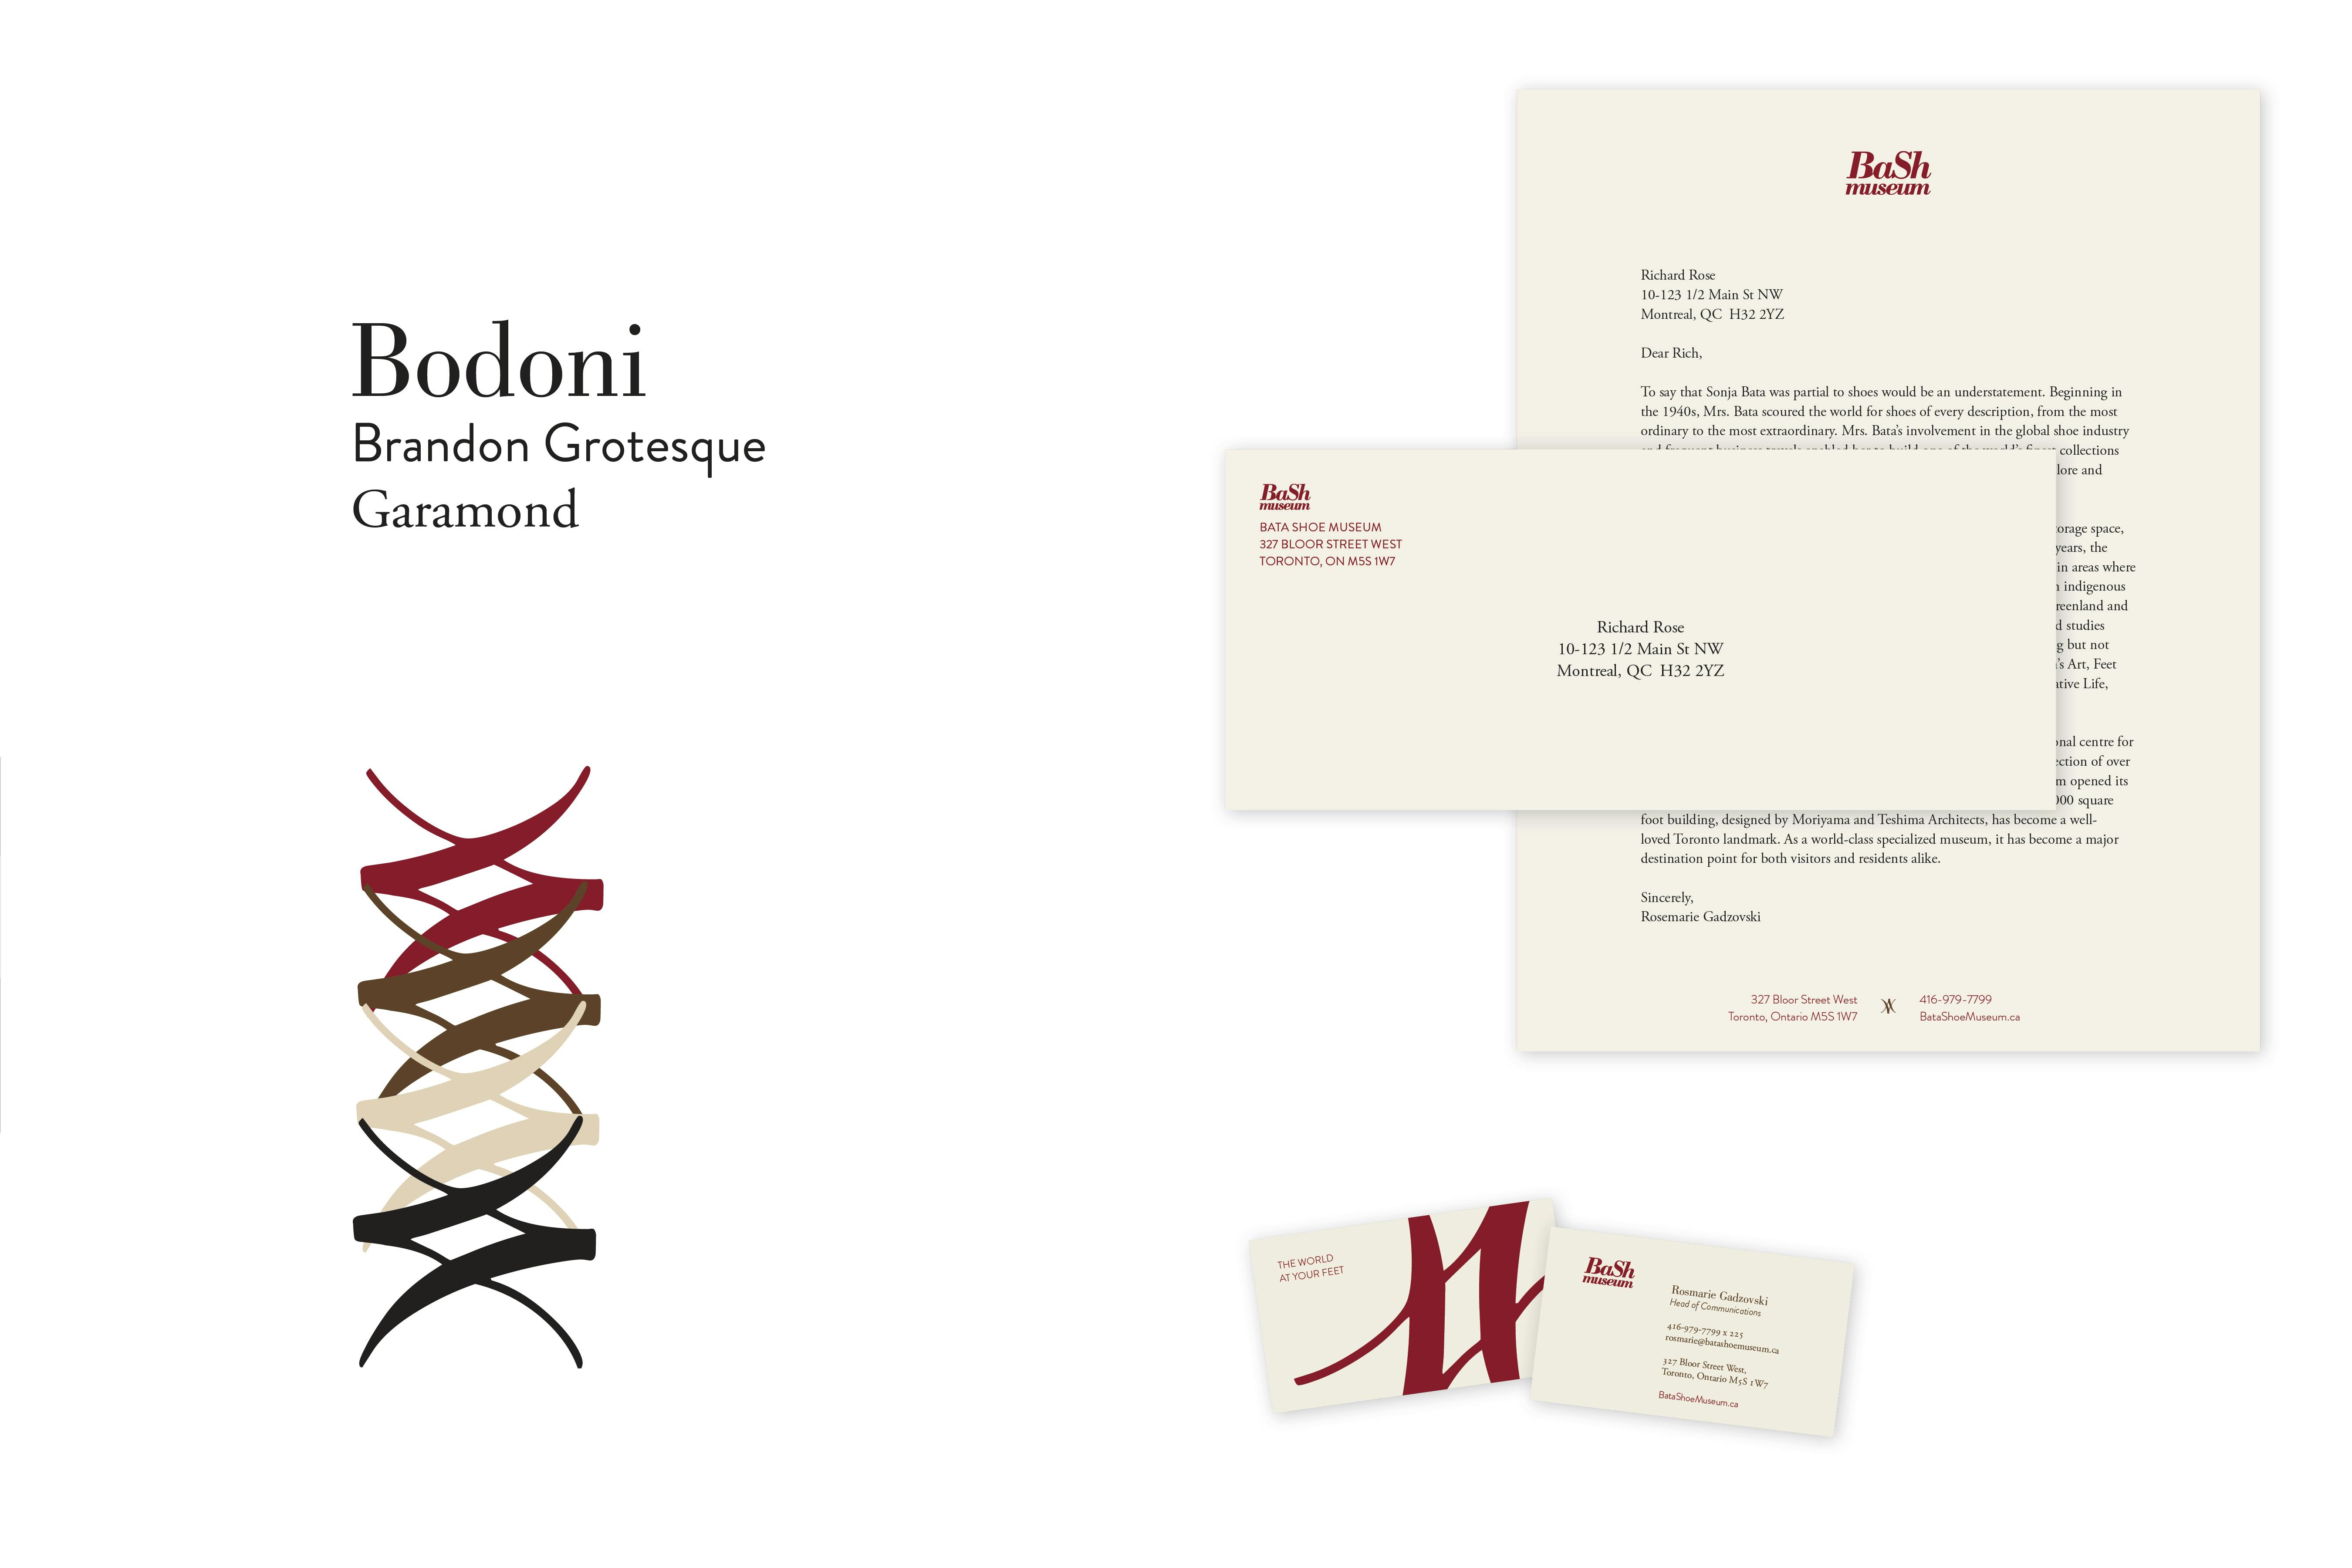 Mockup showing Bodoni, Brandon Grotesque and Garamond typefaces with color swatches applied to branded stationery